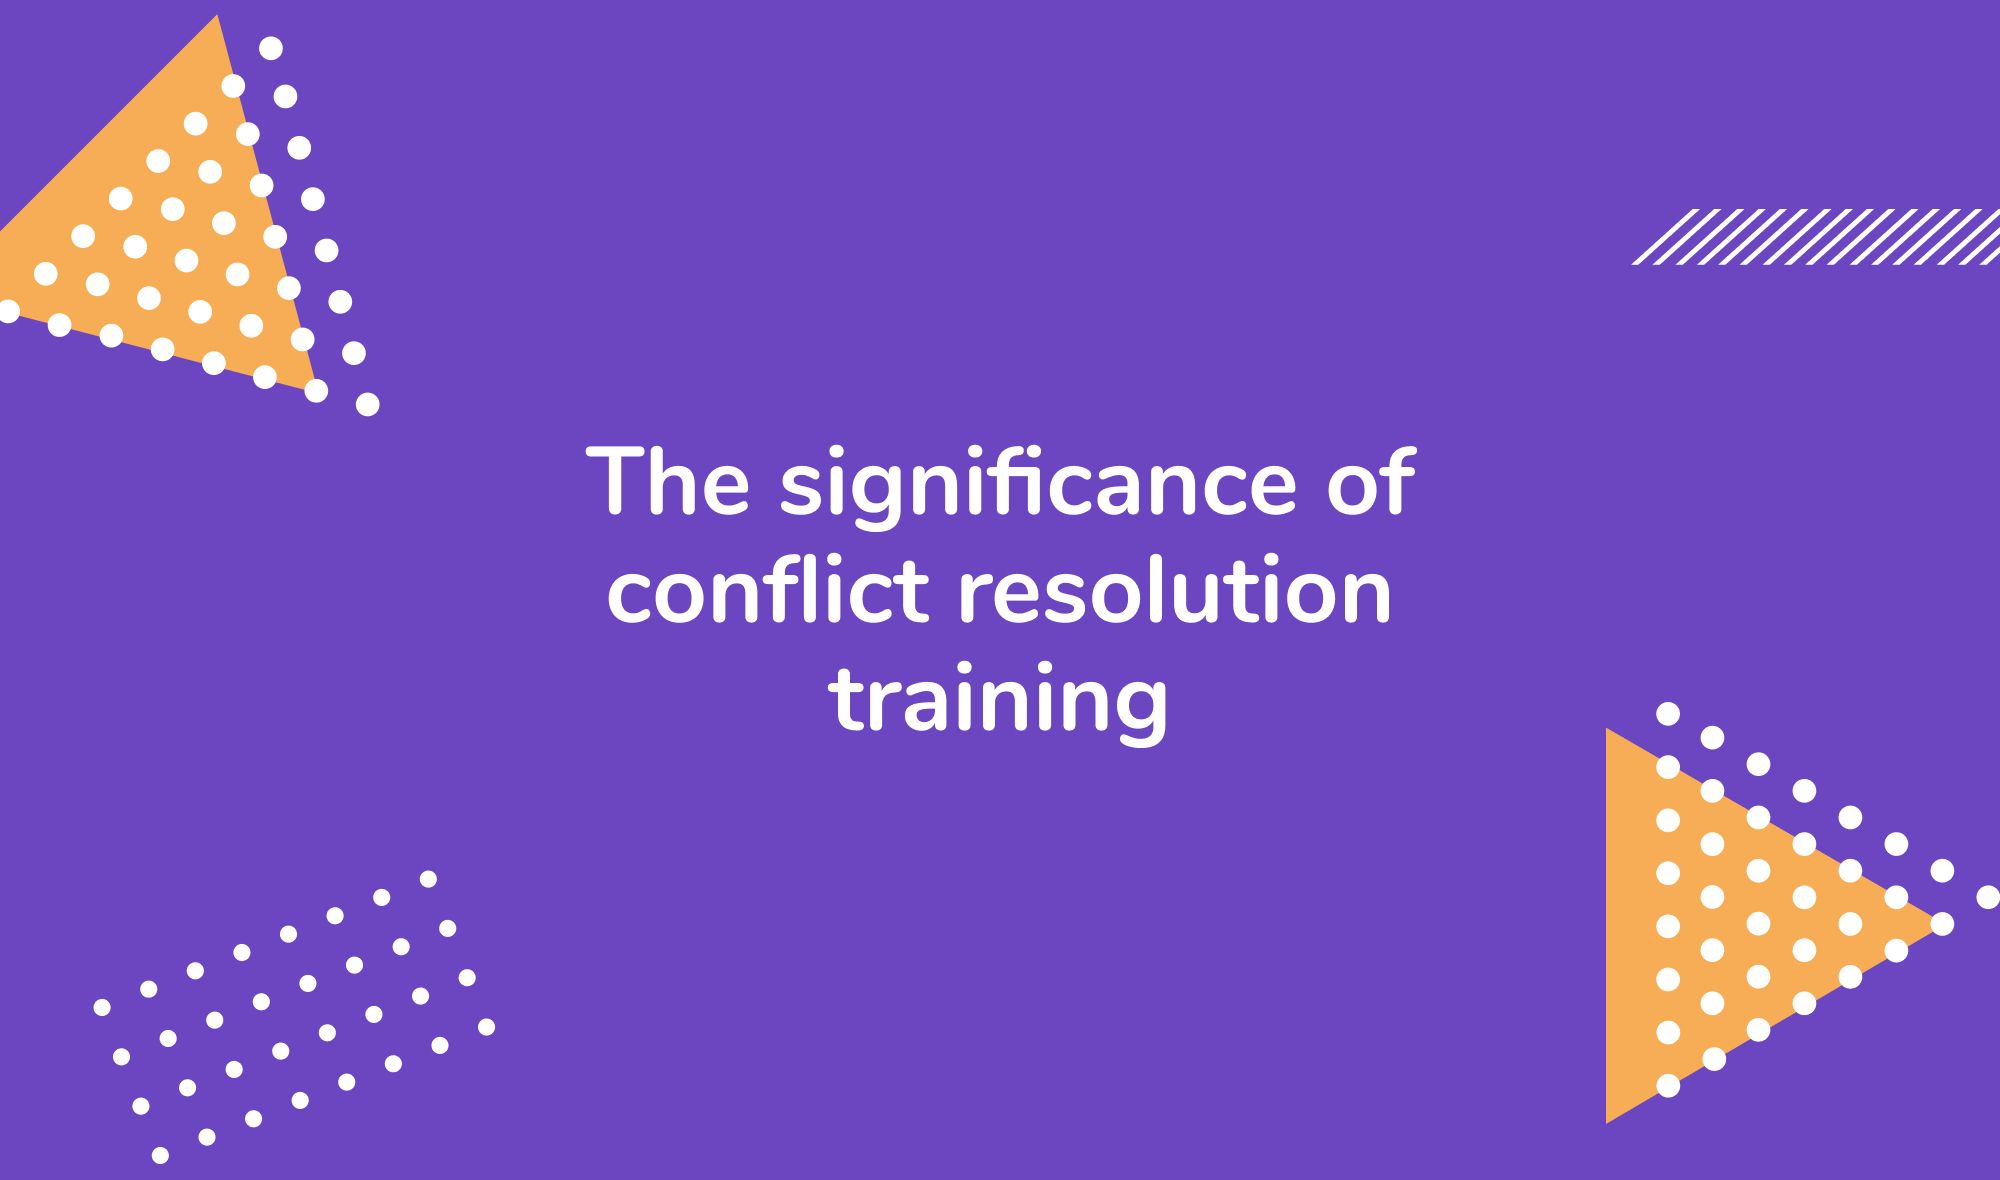 The significance of conflict resolution training